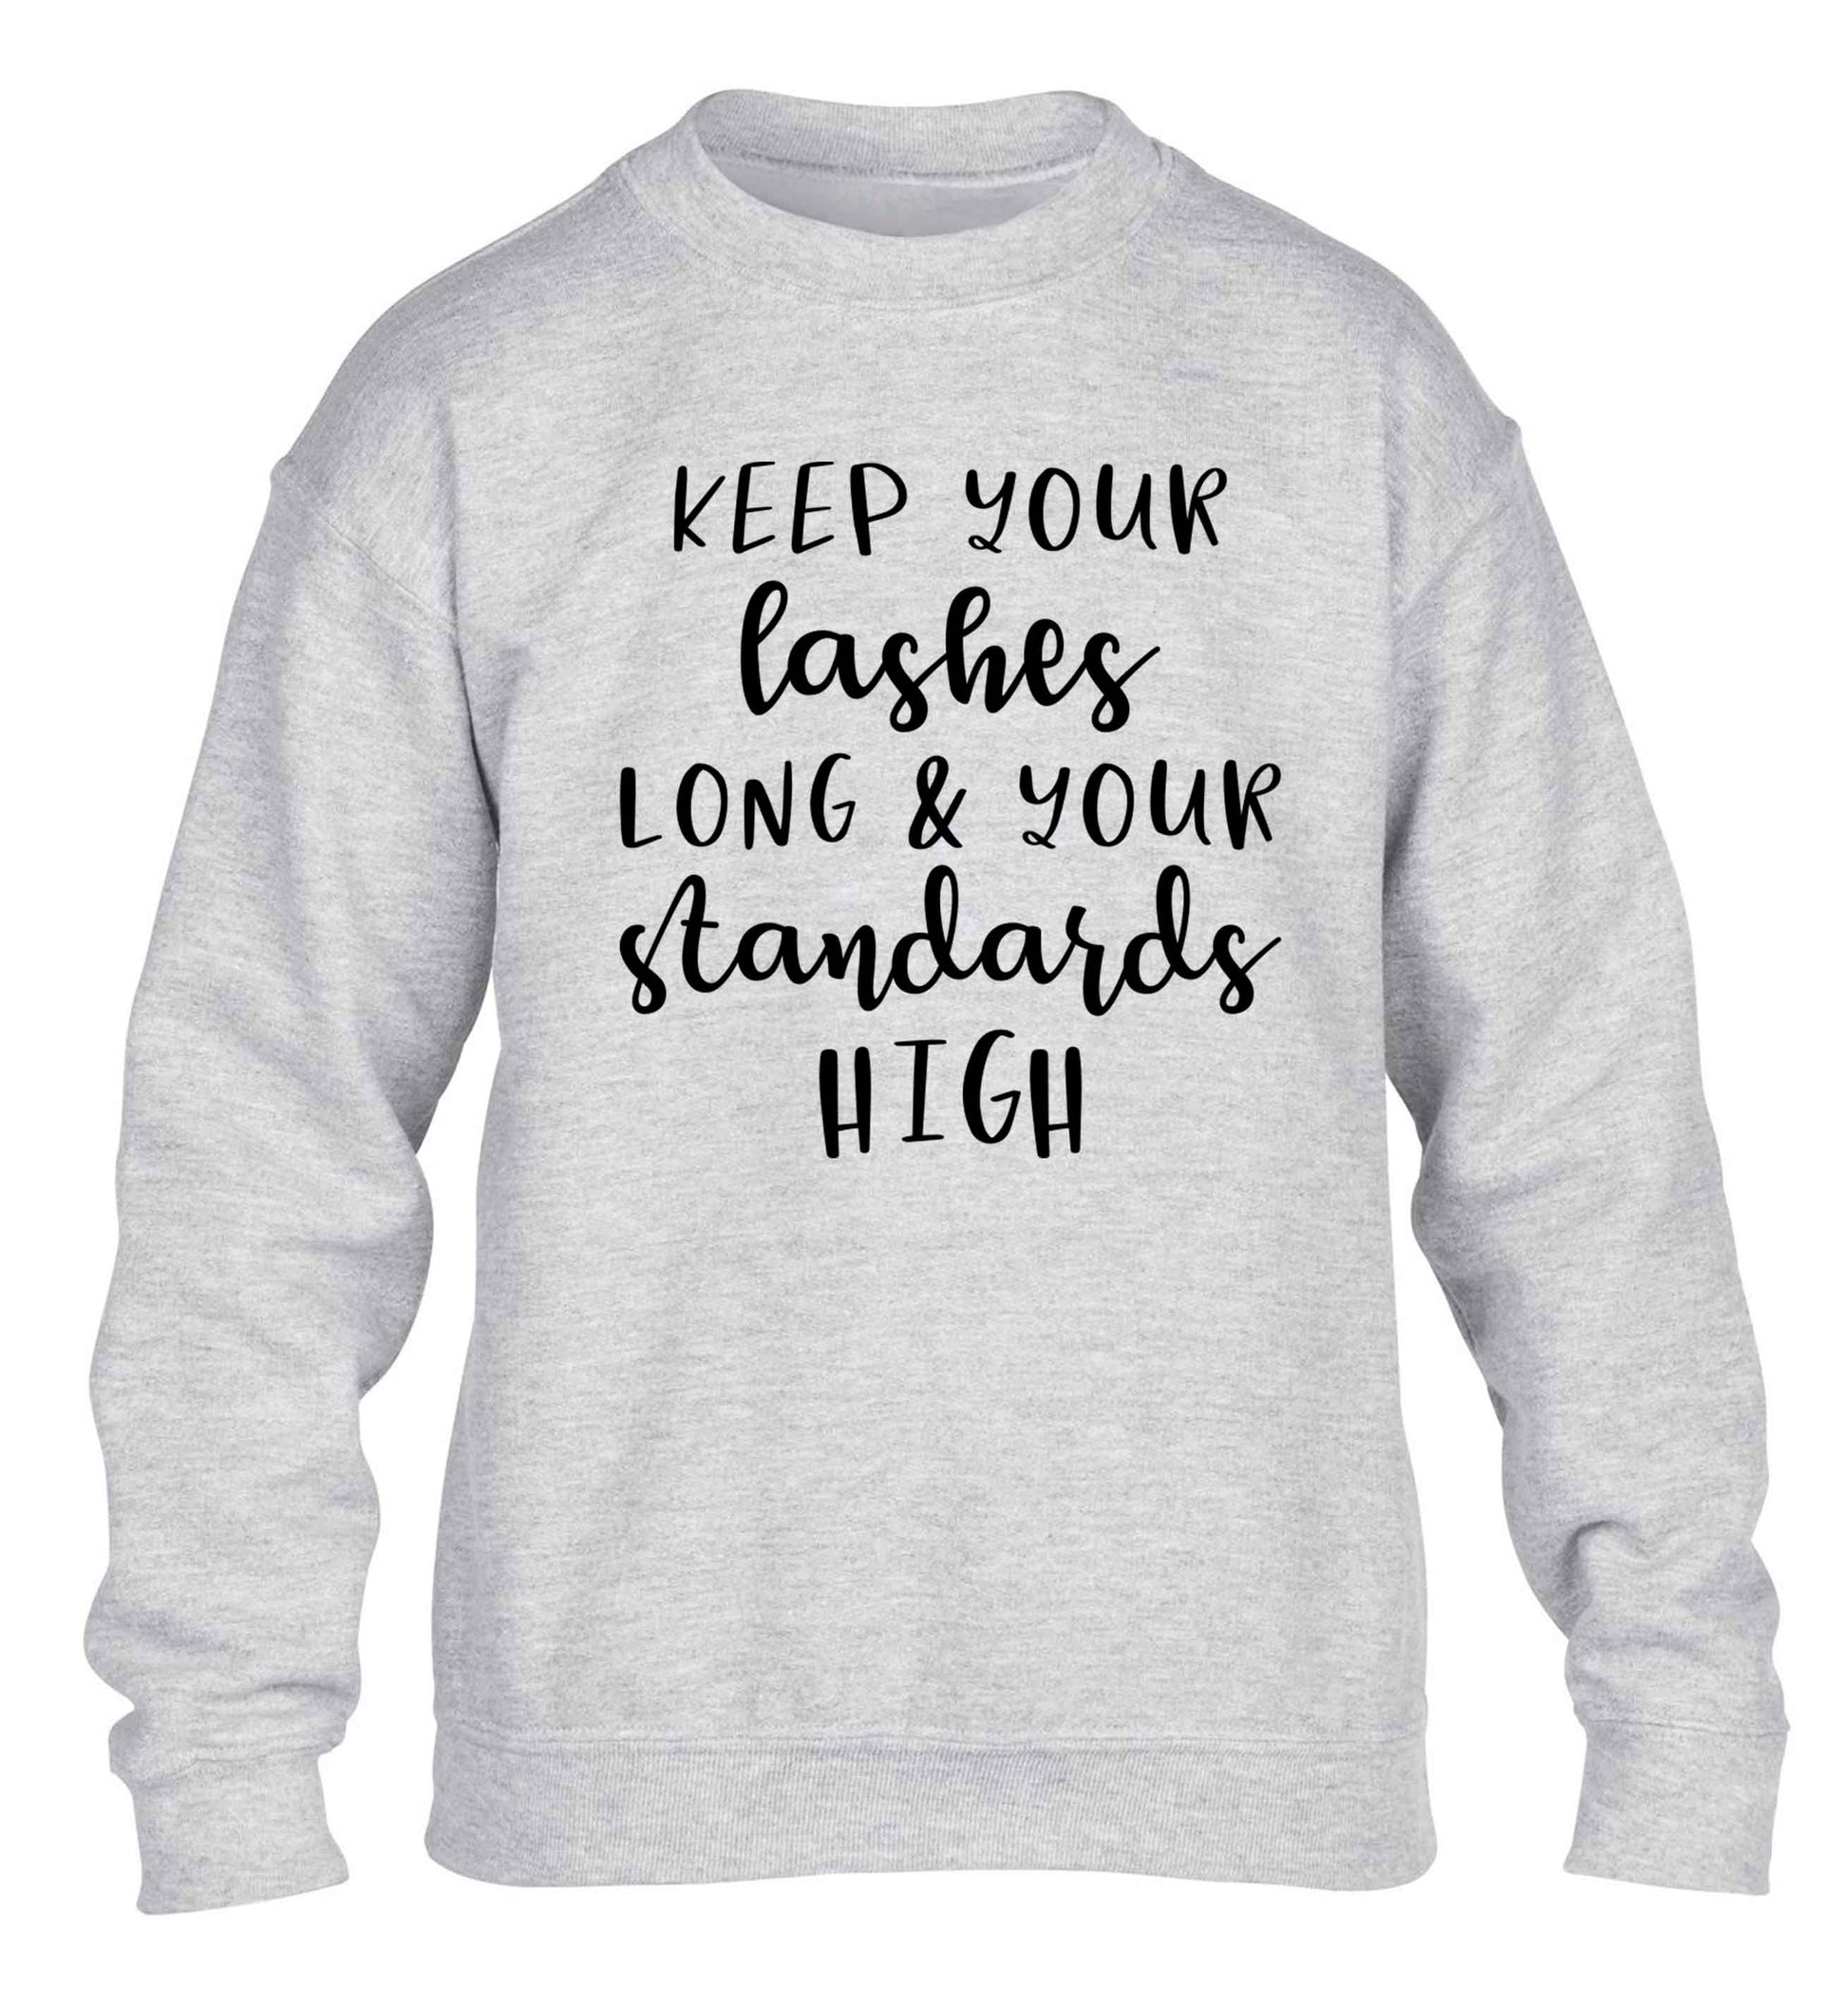 Keep your lashes long and your standards high children's grey sweater 12-13 Years